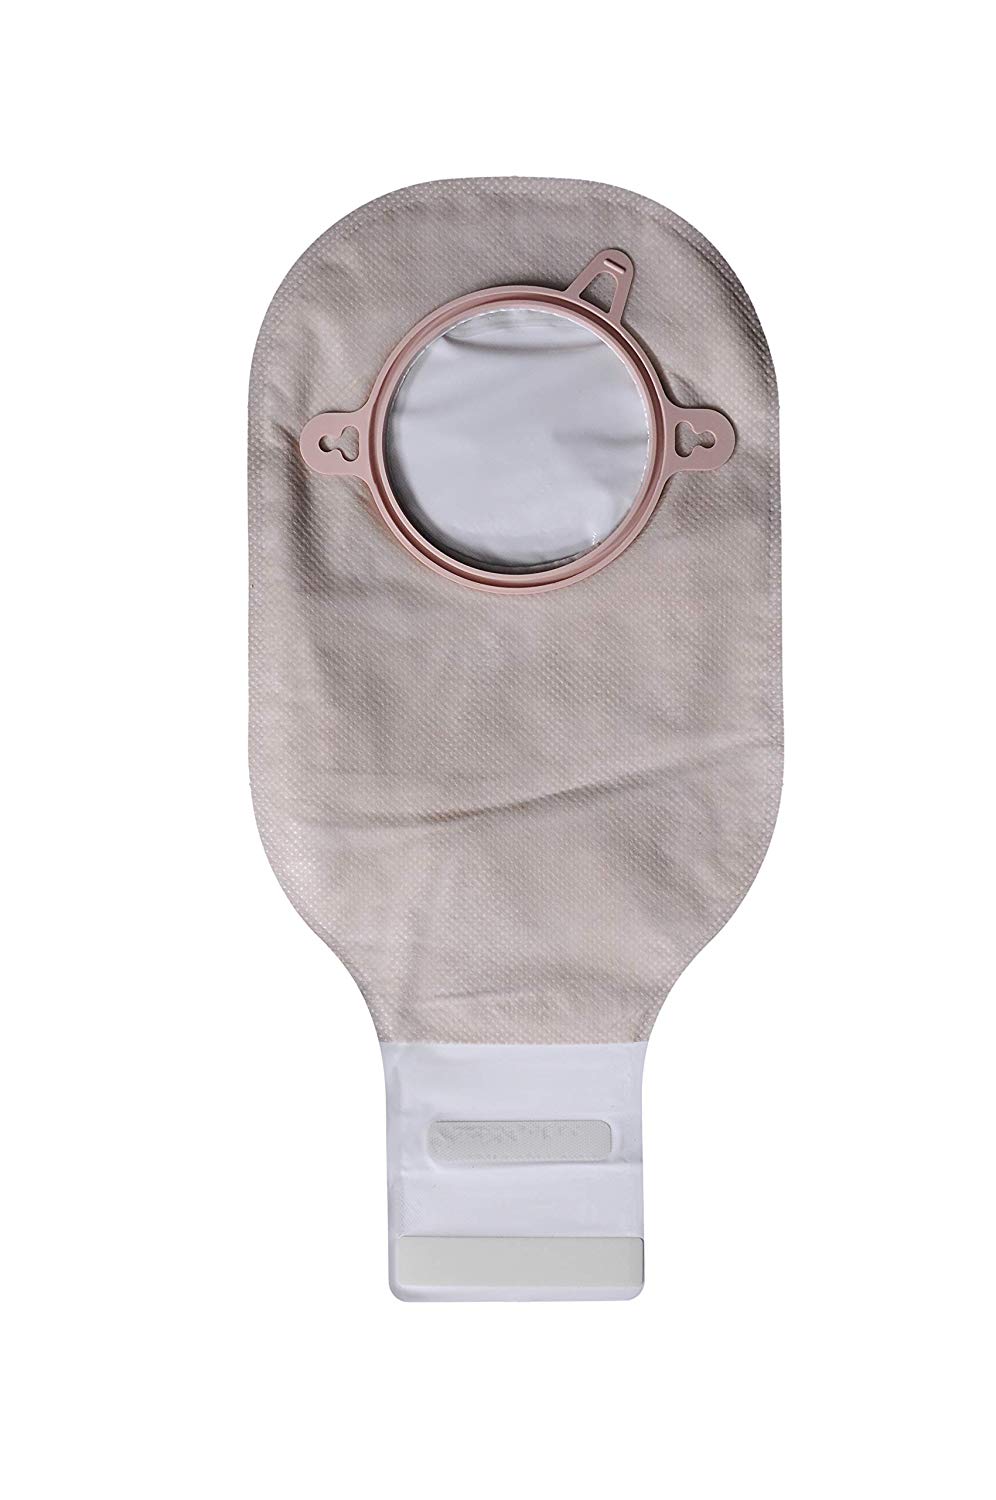 Colostomy Bag, Stoma Bag, Ostomy Bag and Other Oncology Products